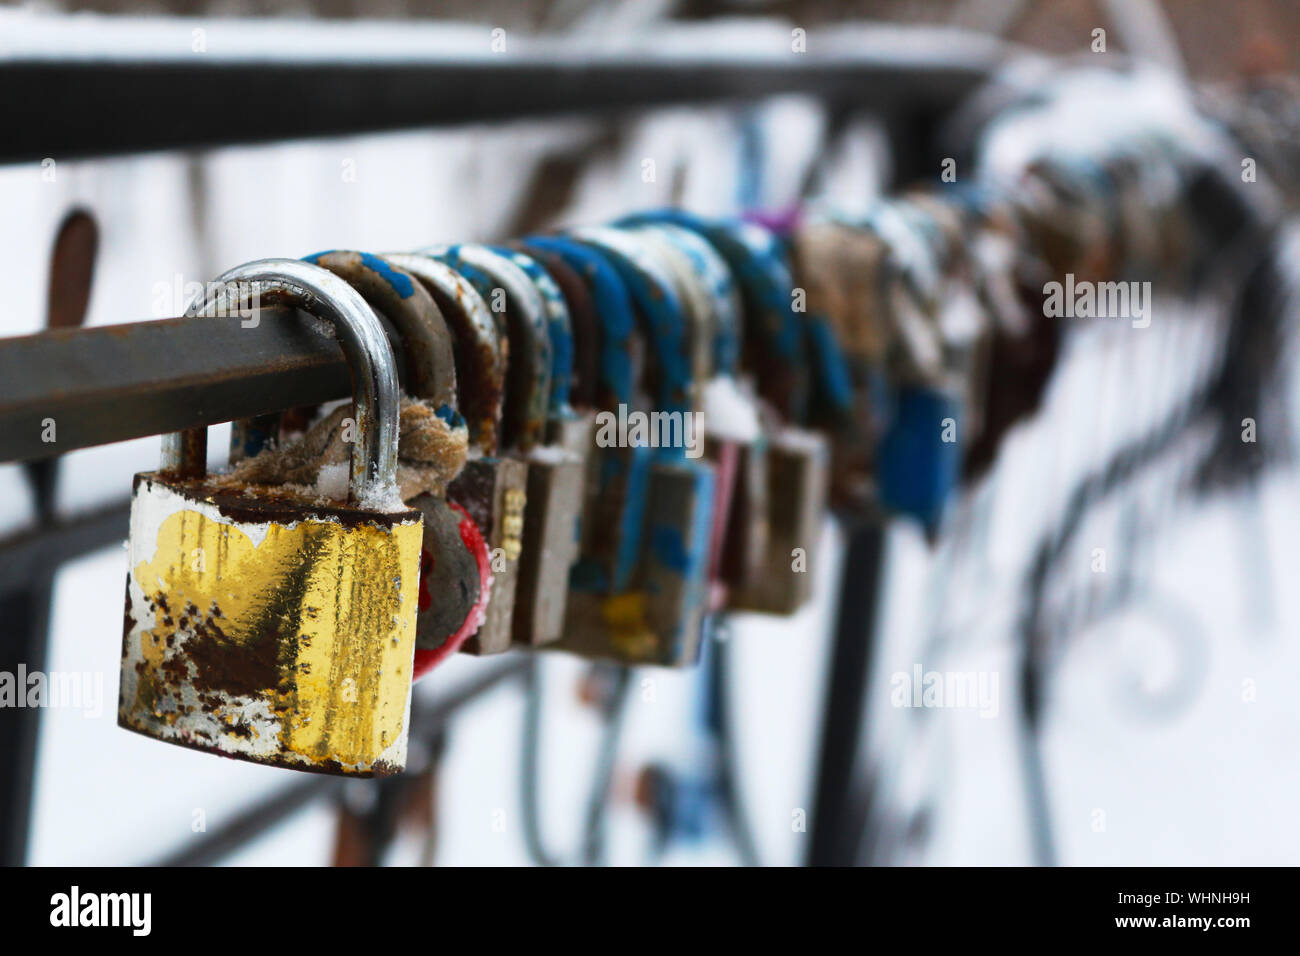 relationship, lock in shape of heart on the bridge on a wedding tradition, wallpaper Stock Photo